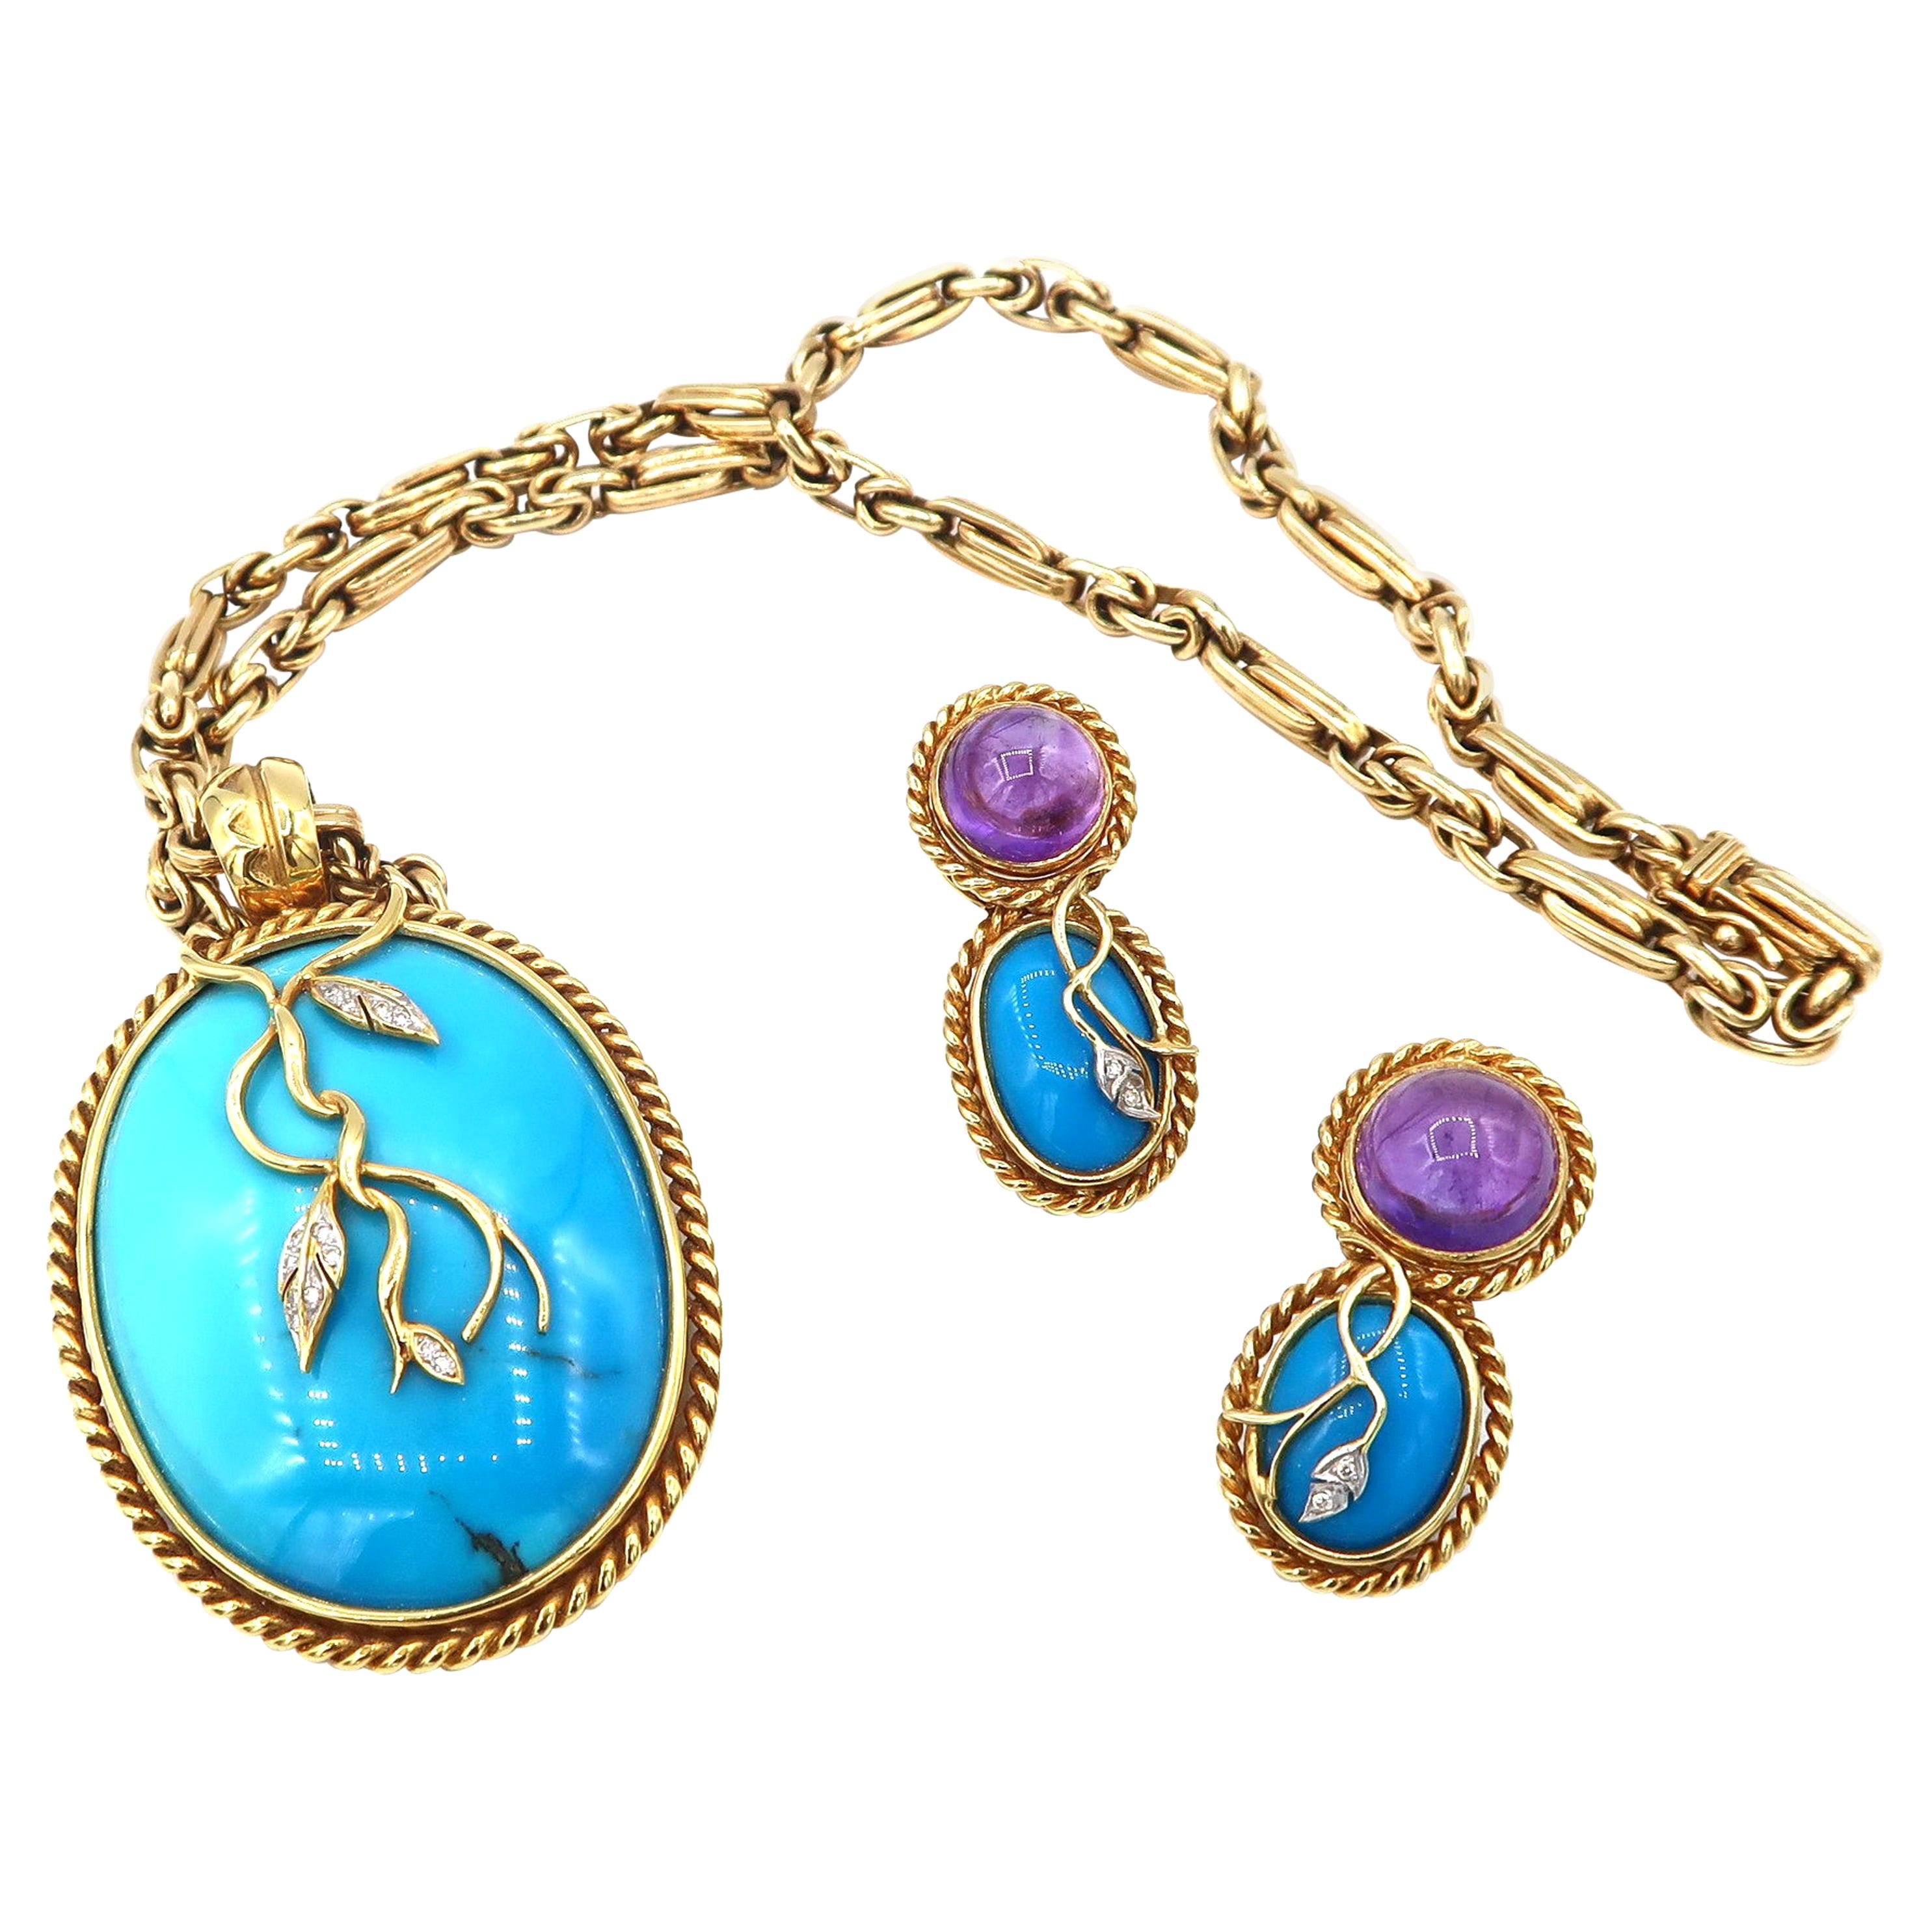 Rope Detail Cabochon Amethyst Turquoise Diamond Pendant Chain and Earrings Set